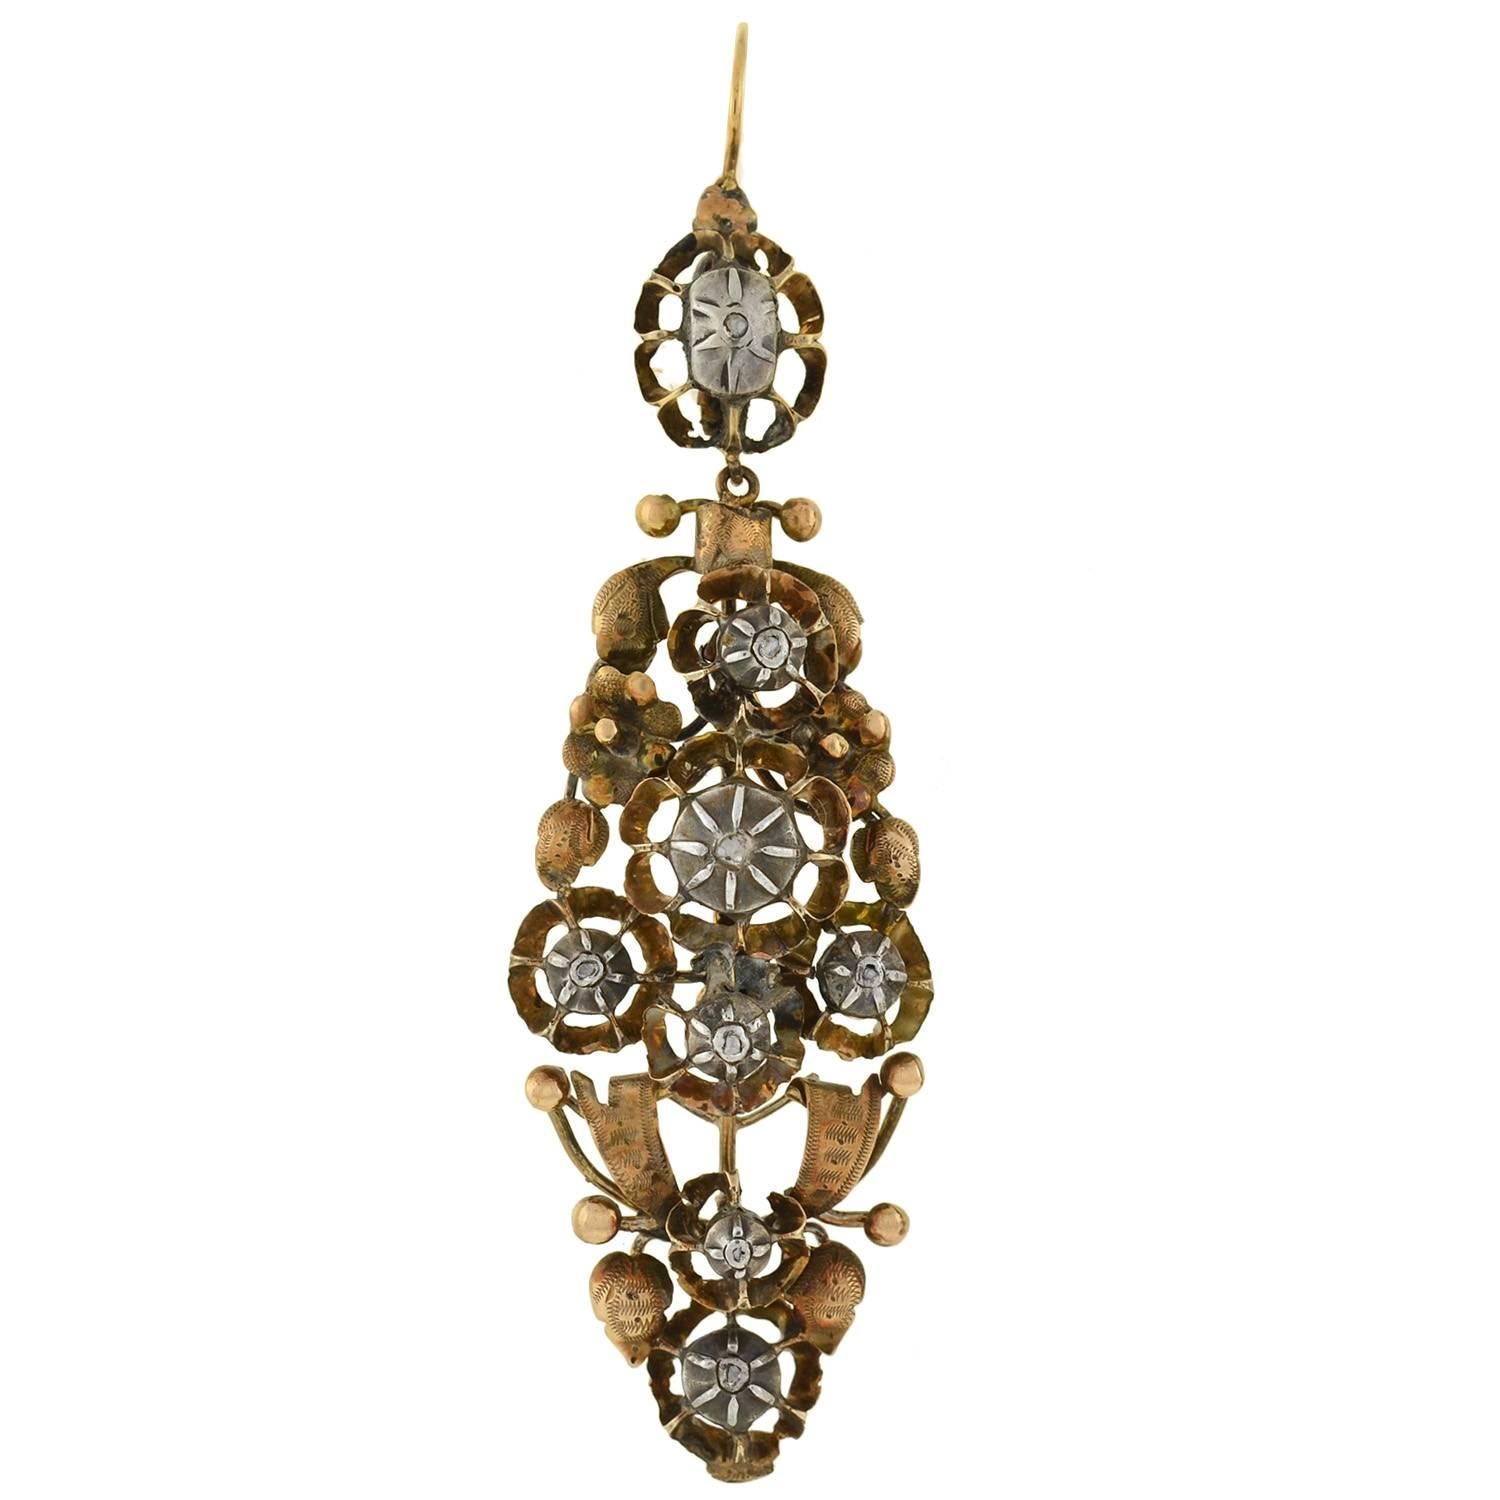 An incredible pair of earrings from the Victorian (ca1860) era! These impressive earrings are quite large in size and are handmade of sterling topped 14kt gold. The design is very ornate with flower like clusters, leaves, and ribbons that create a